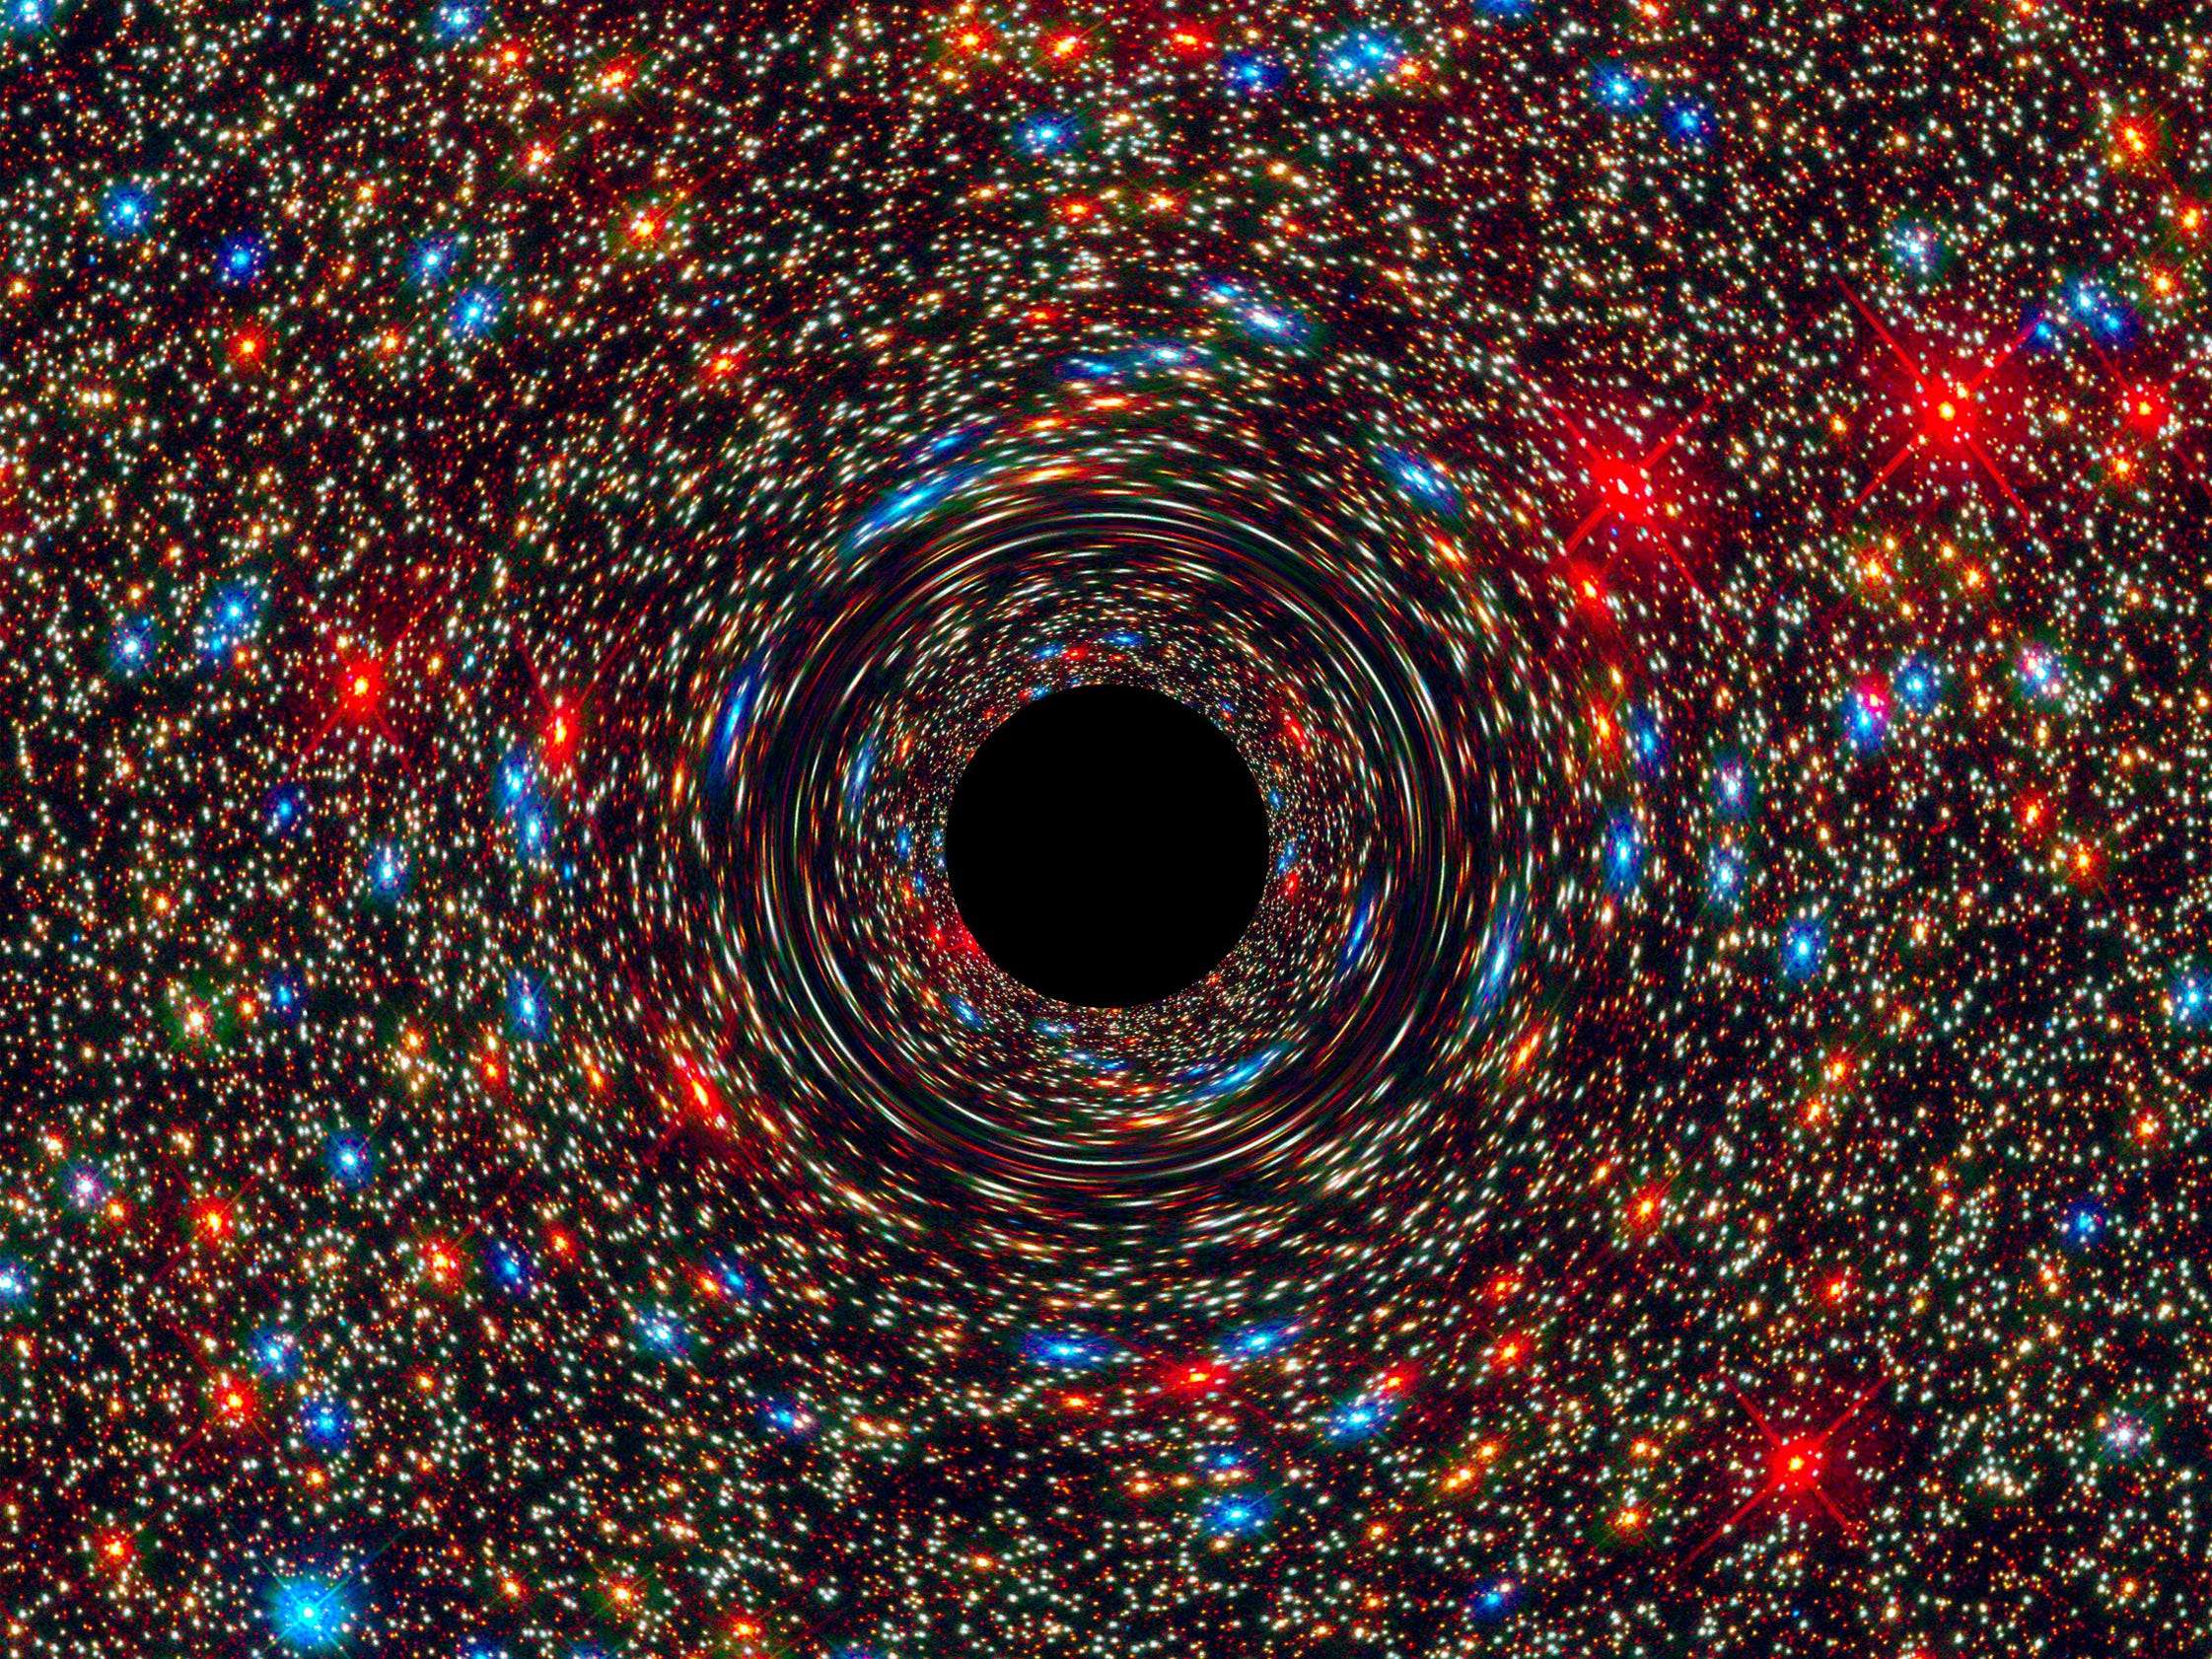 Astronomers found the closest black hole to Earth — and there could be